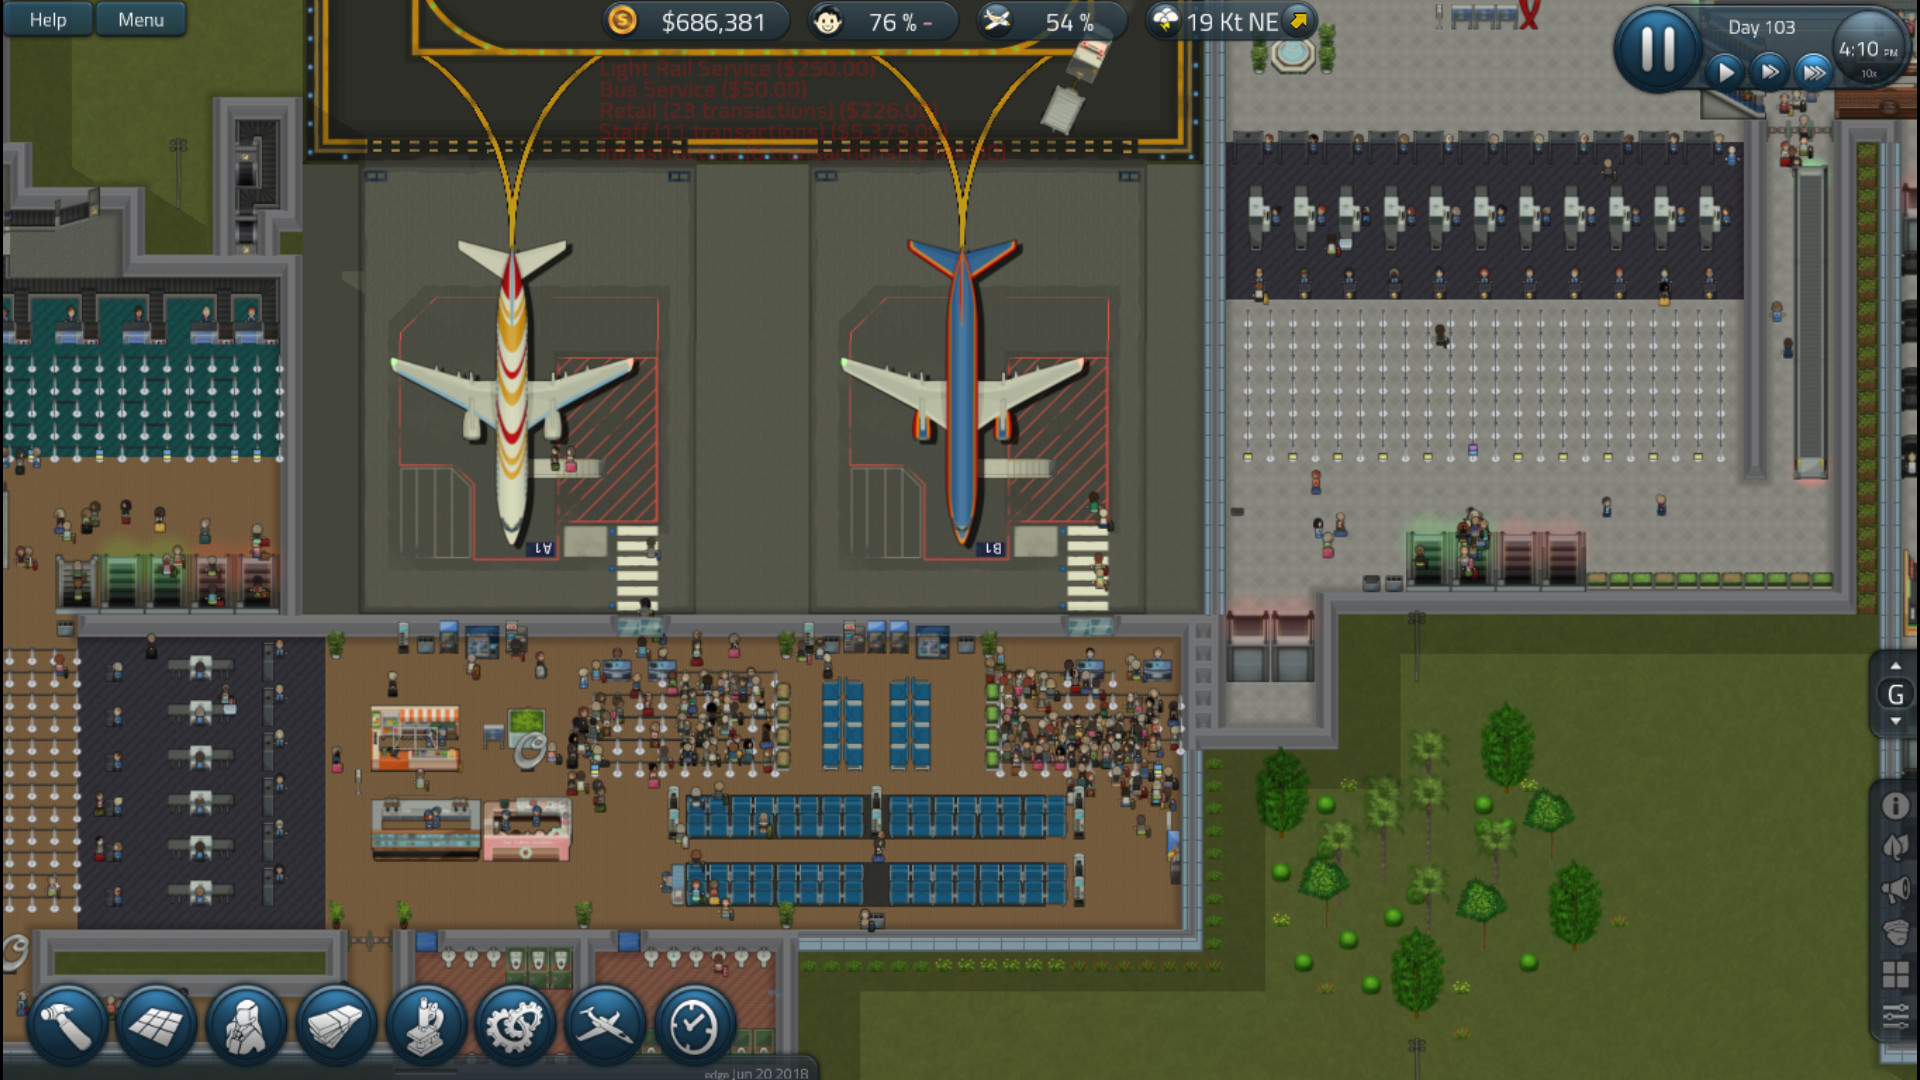 simairport free download full version for pc